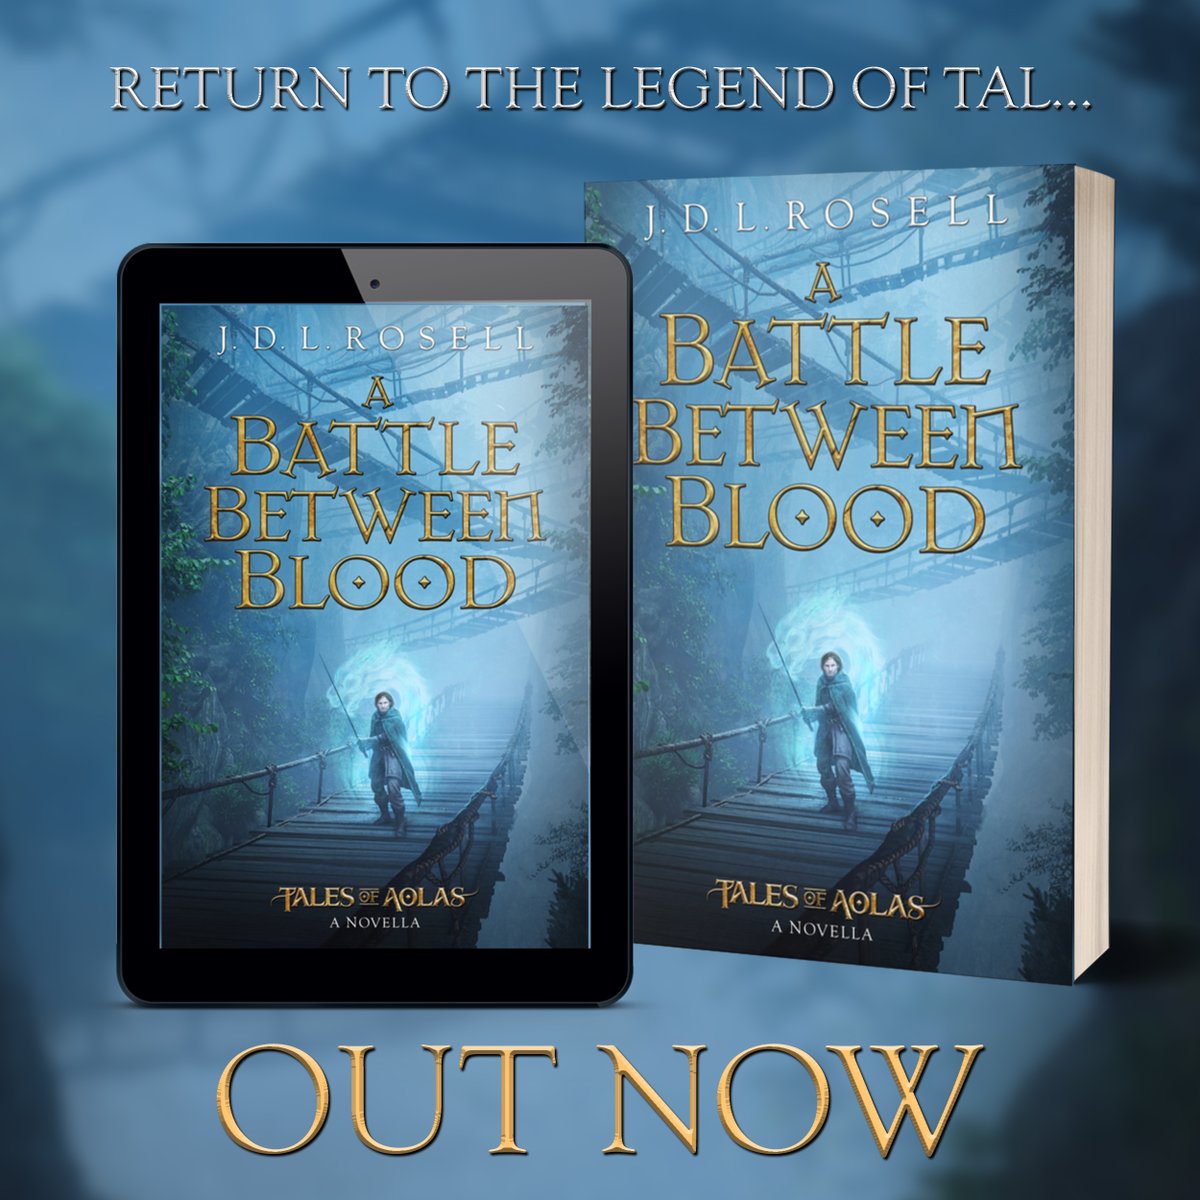 Ta-da! A new book - and part of the Legend of Tal universe, no less - is out today! 📖 Join Garin and his companions for one final battle as they try to take back the elven tree city of Elendol... much easier said than done. May you enjoy it! geni.us/ABattleBetween…